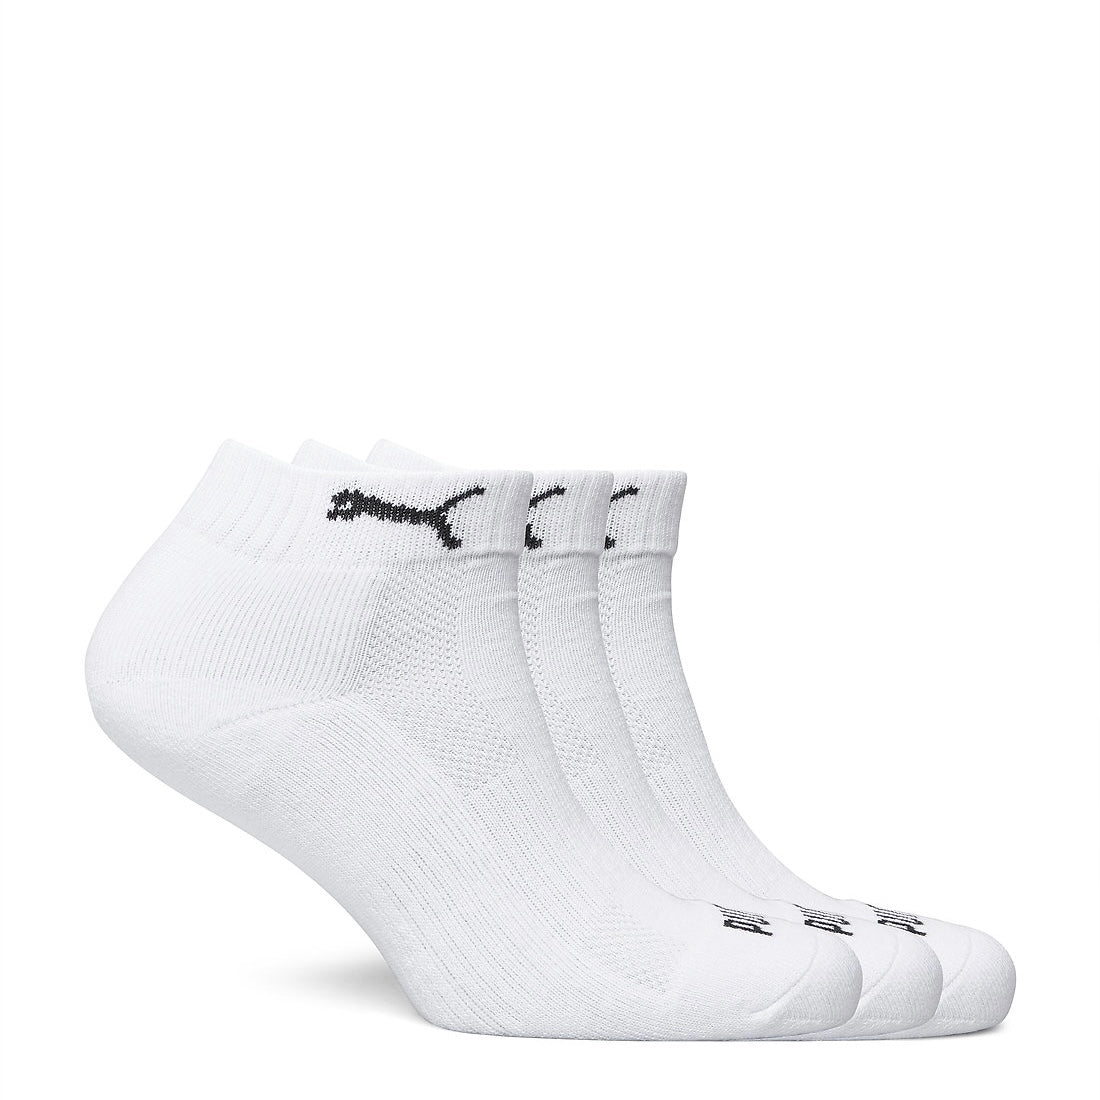 P-U-M-A .  Pack of 3 white ankles